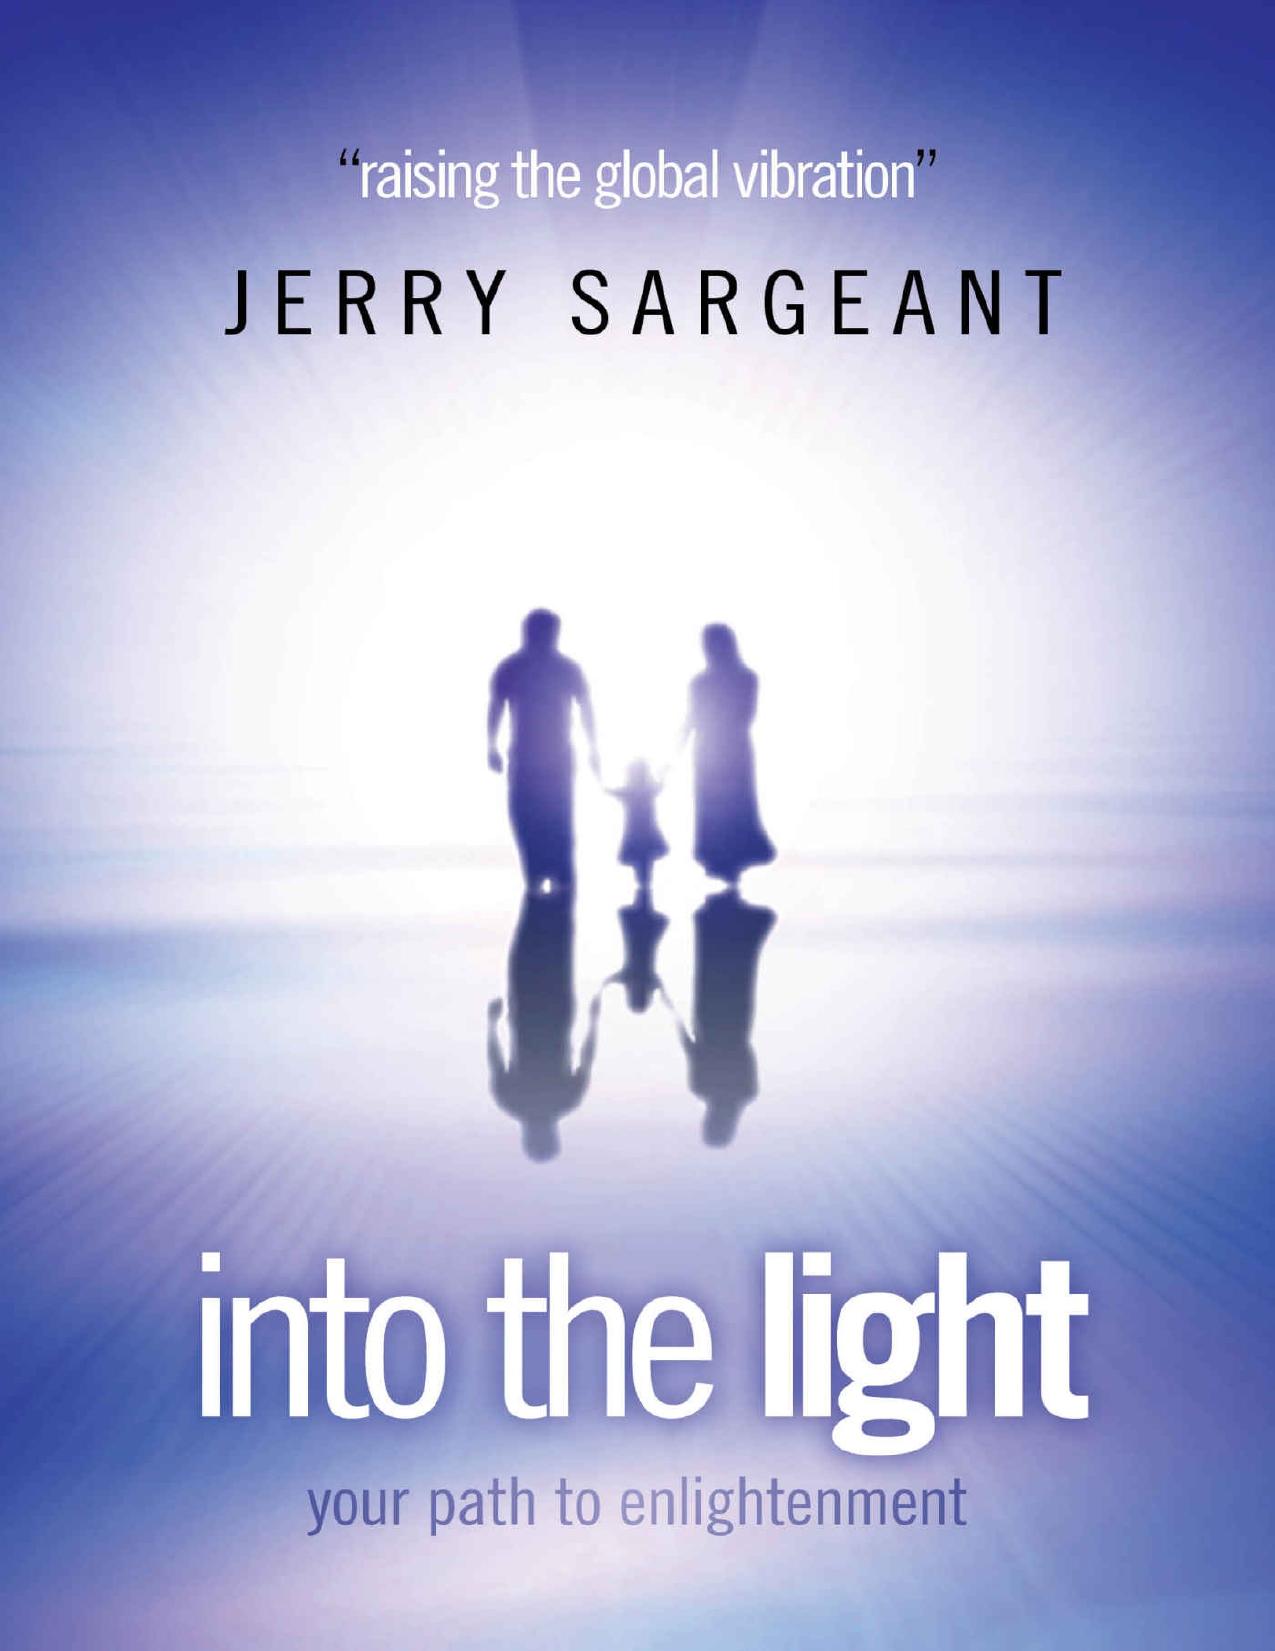 into the light by Jerry Sargeant